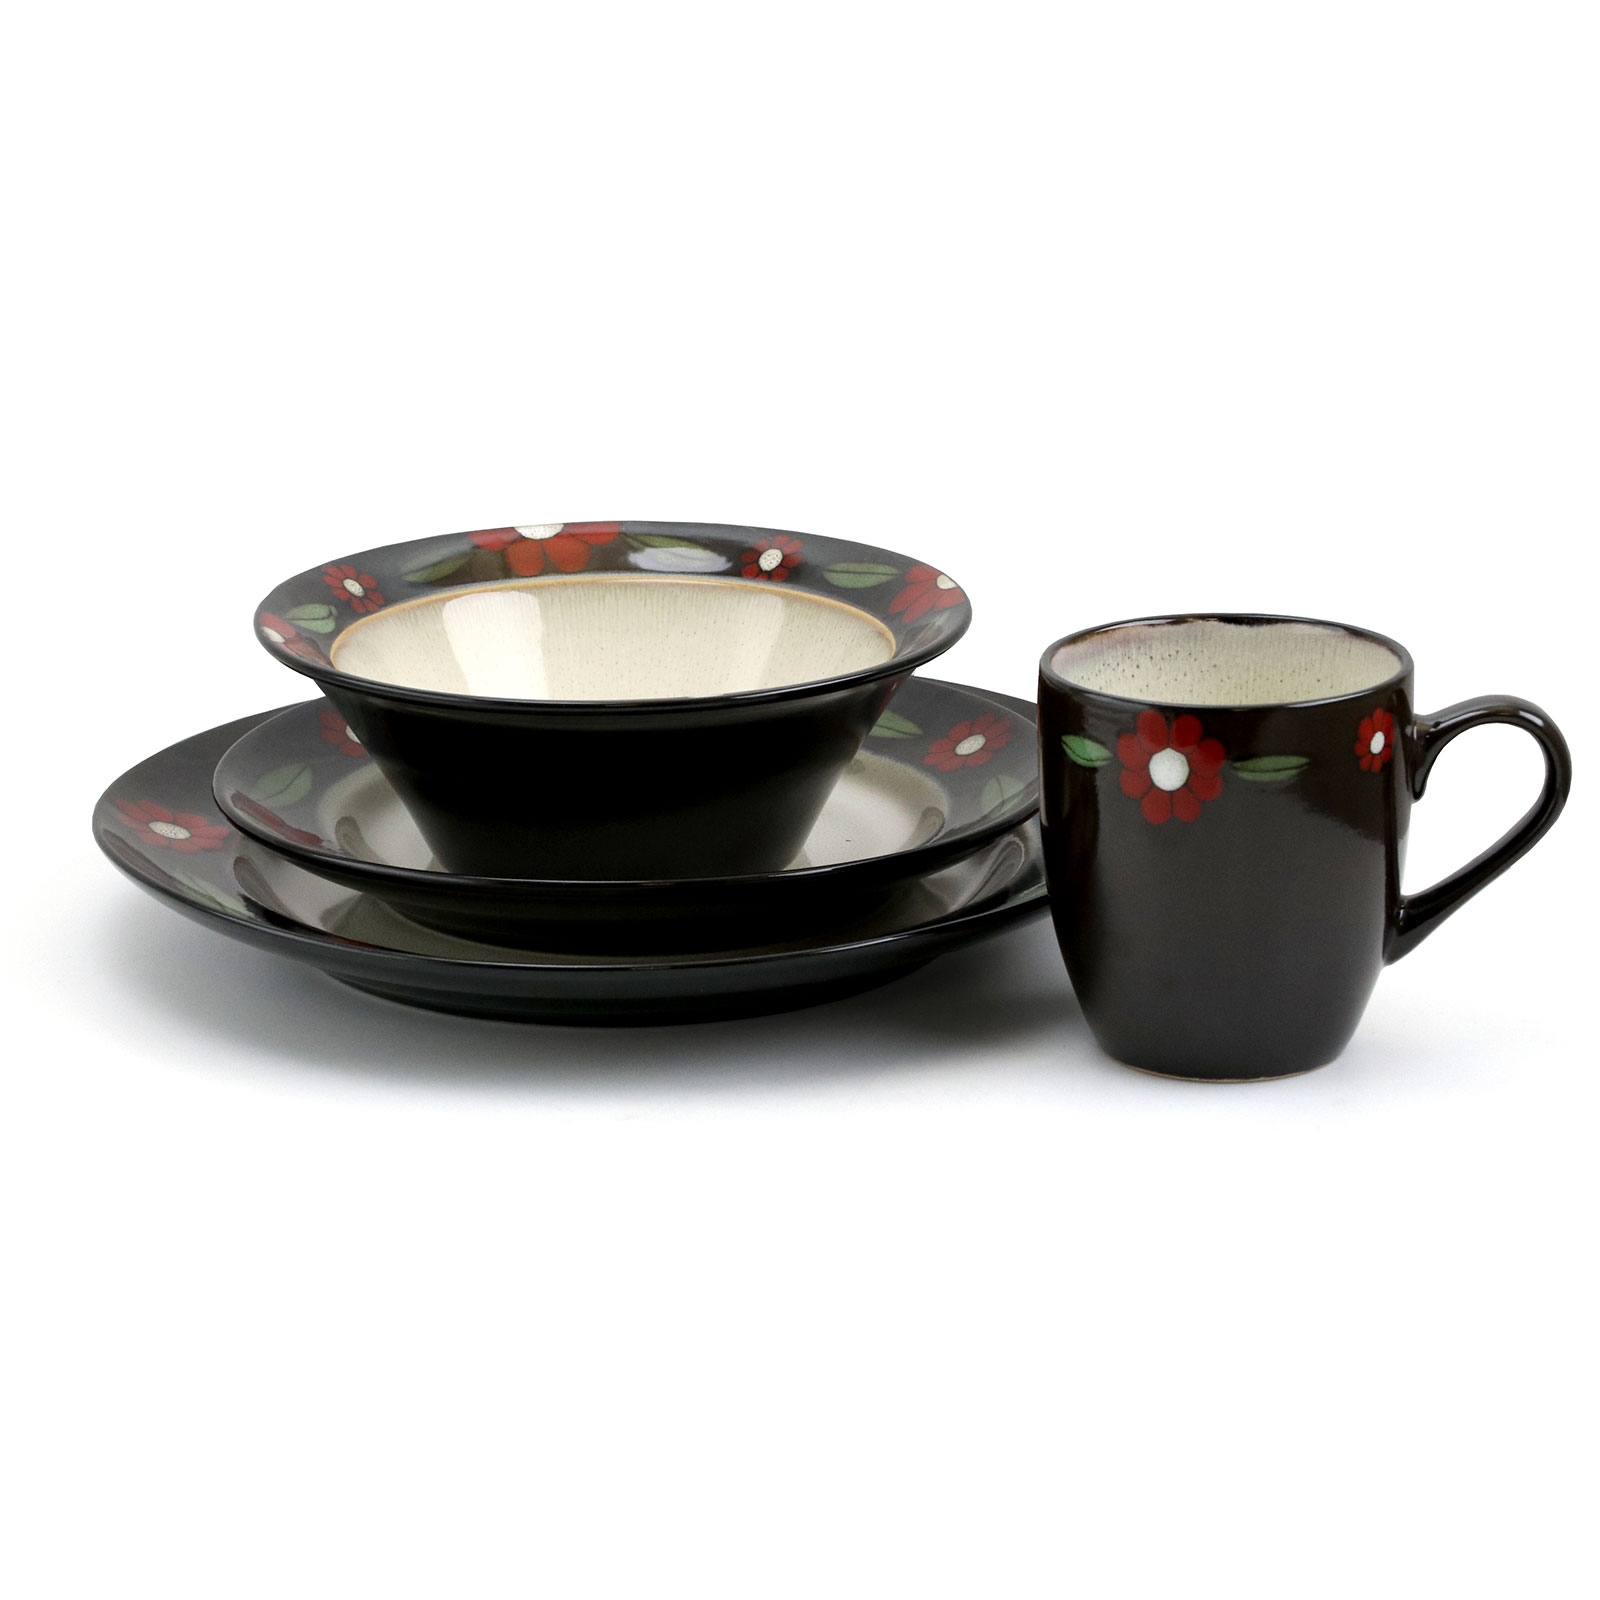 Elama Homestead 16 Piece Dinnerware Set in Brown and Floral - image 3 of 8